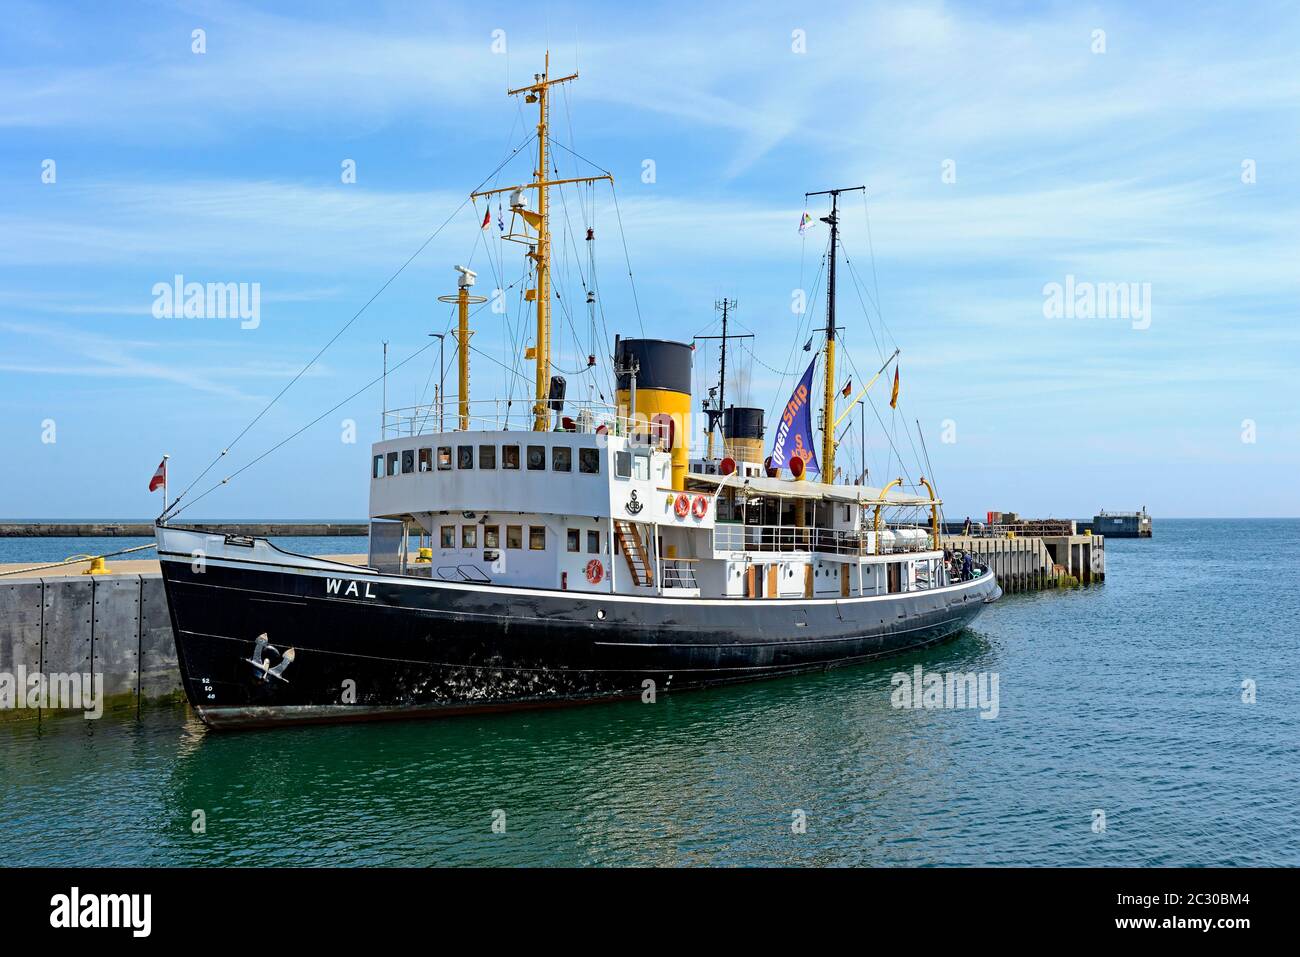 Historic steam ice breaker, 'Wal', in the southern harbour of Helgoland, North Sea, Schleswig-Holstein, Germany Stock Photo